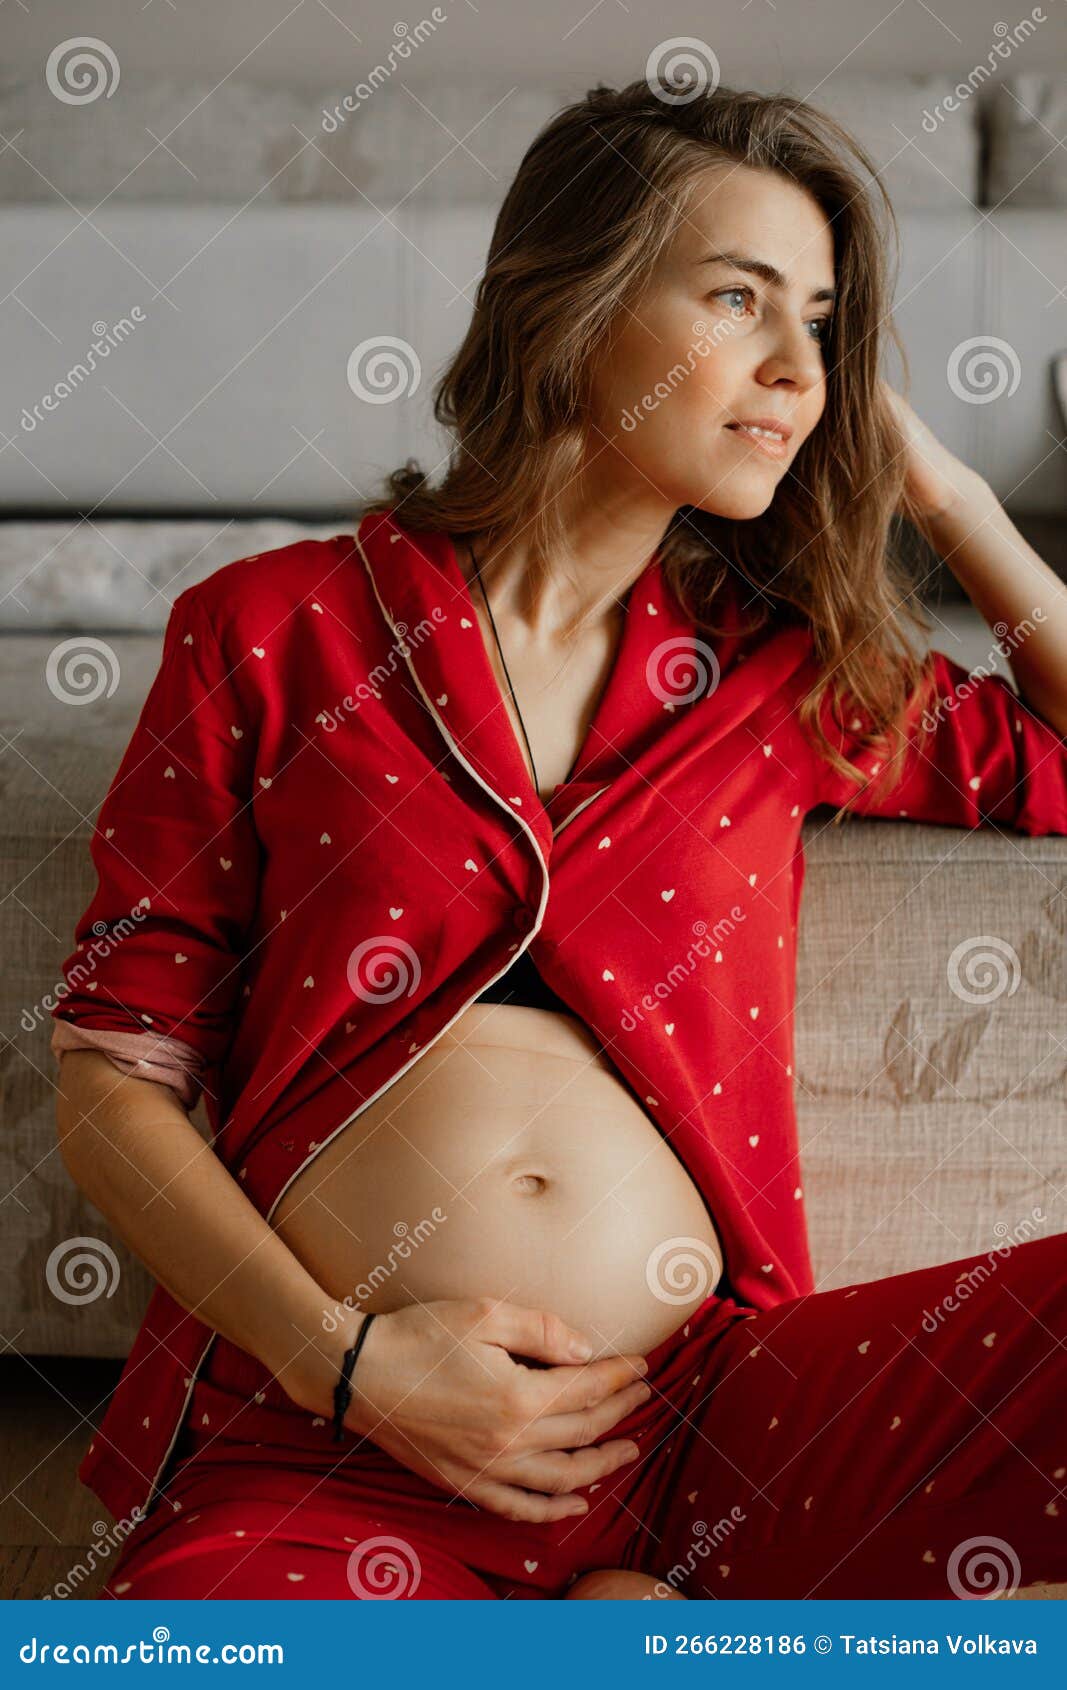 https://thumbs.dreamstime.com/z/vertical-calm-pensive-pregnant-blond-woman-sitting-holding-naked-abdomen-wear-red-loose-pajamas-resting-relaxing-indoors-266228186.jpg